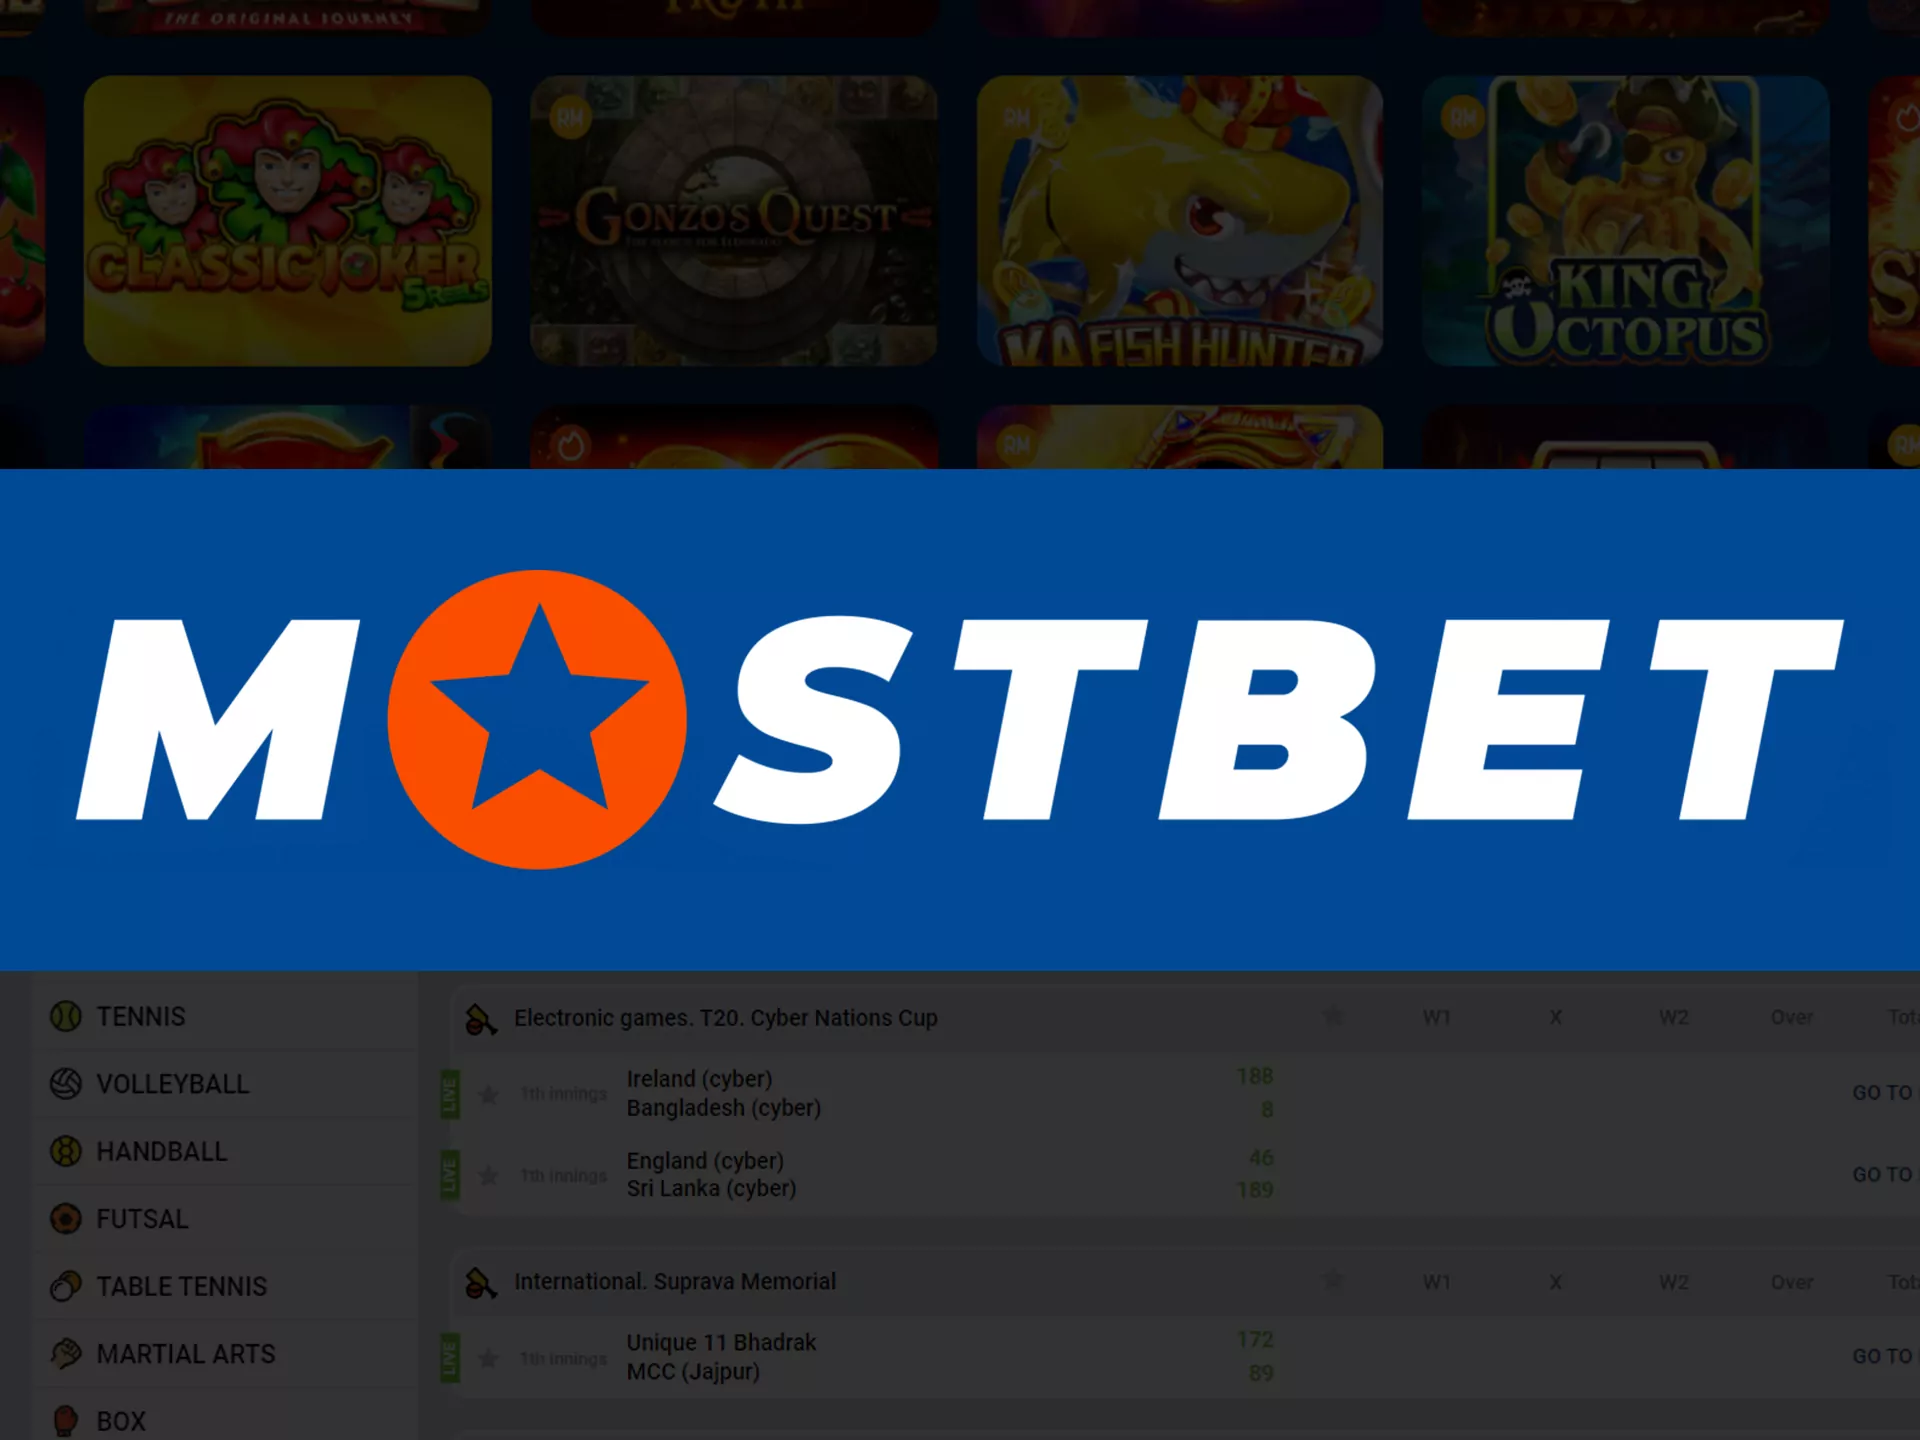 Mostbet is a big betting resource.